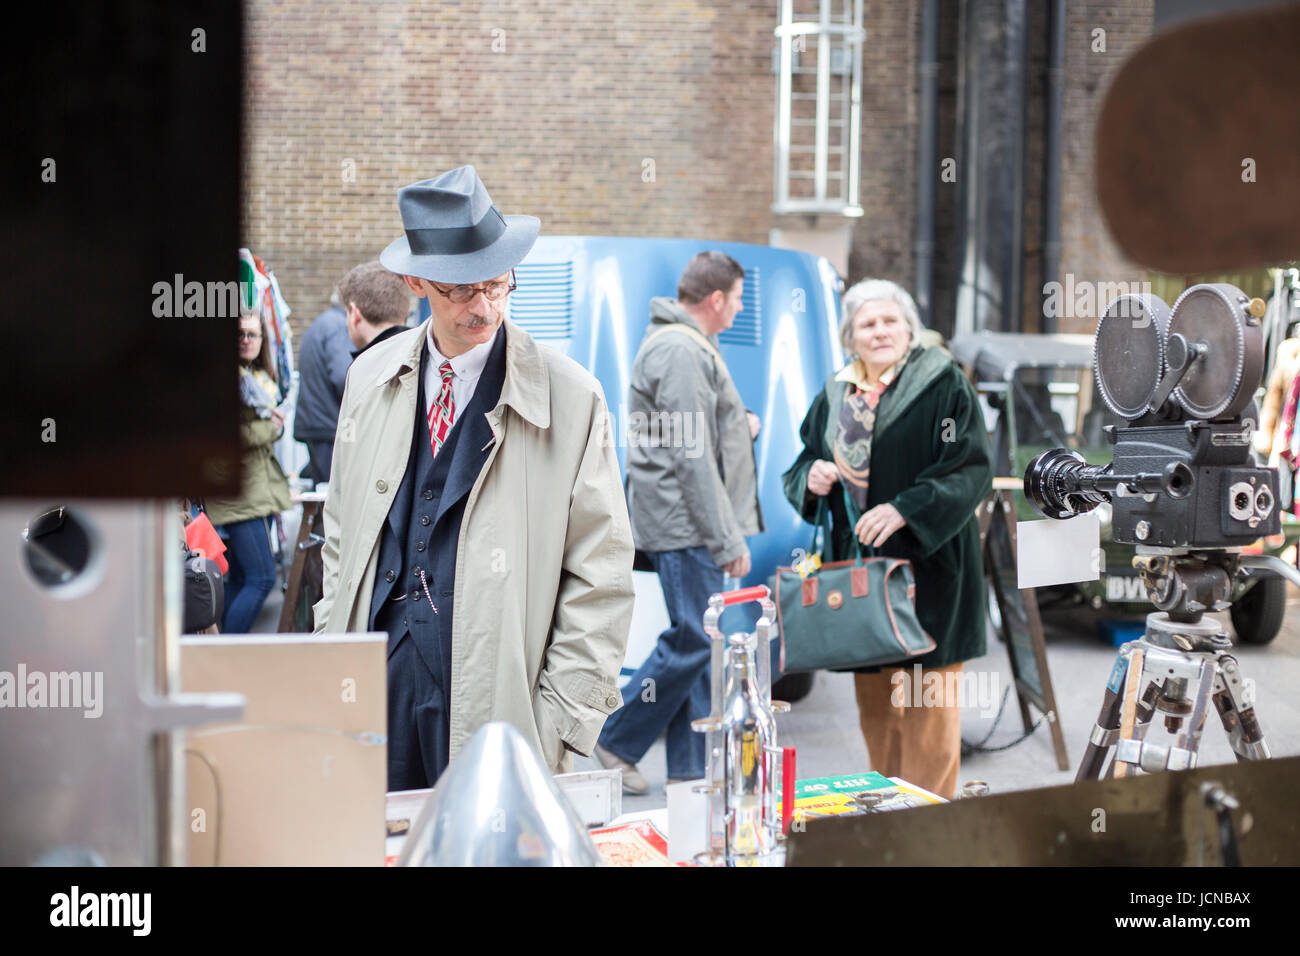 Man looks at signs at vintage fair in London. Stock Photo